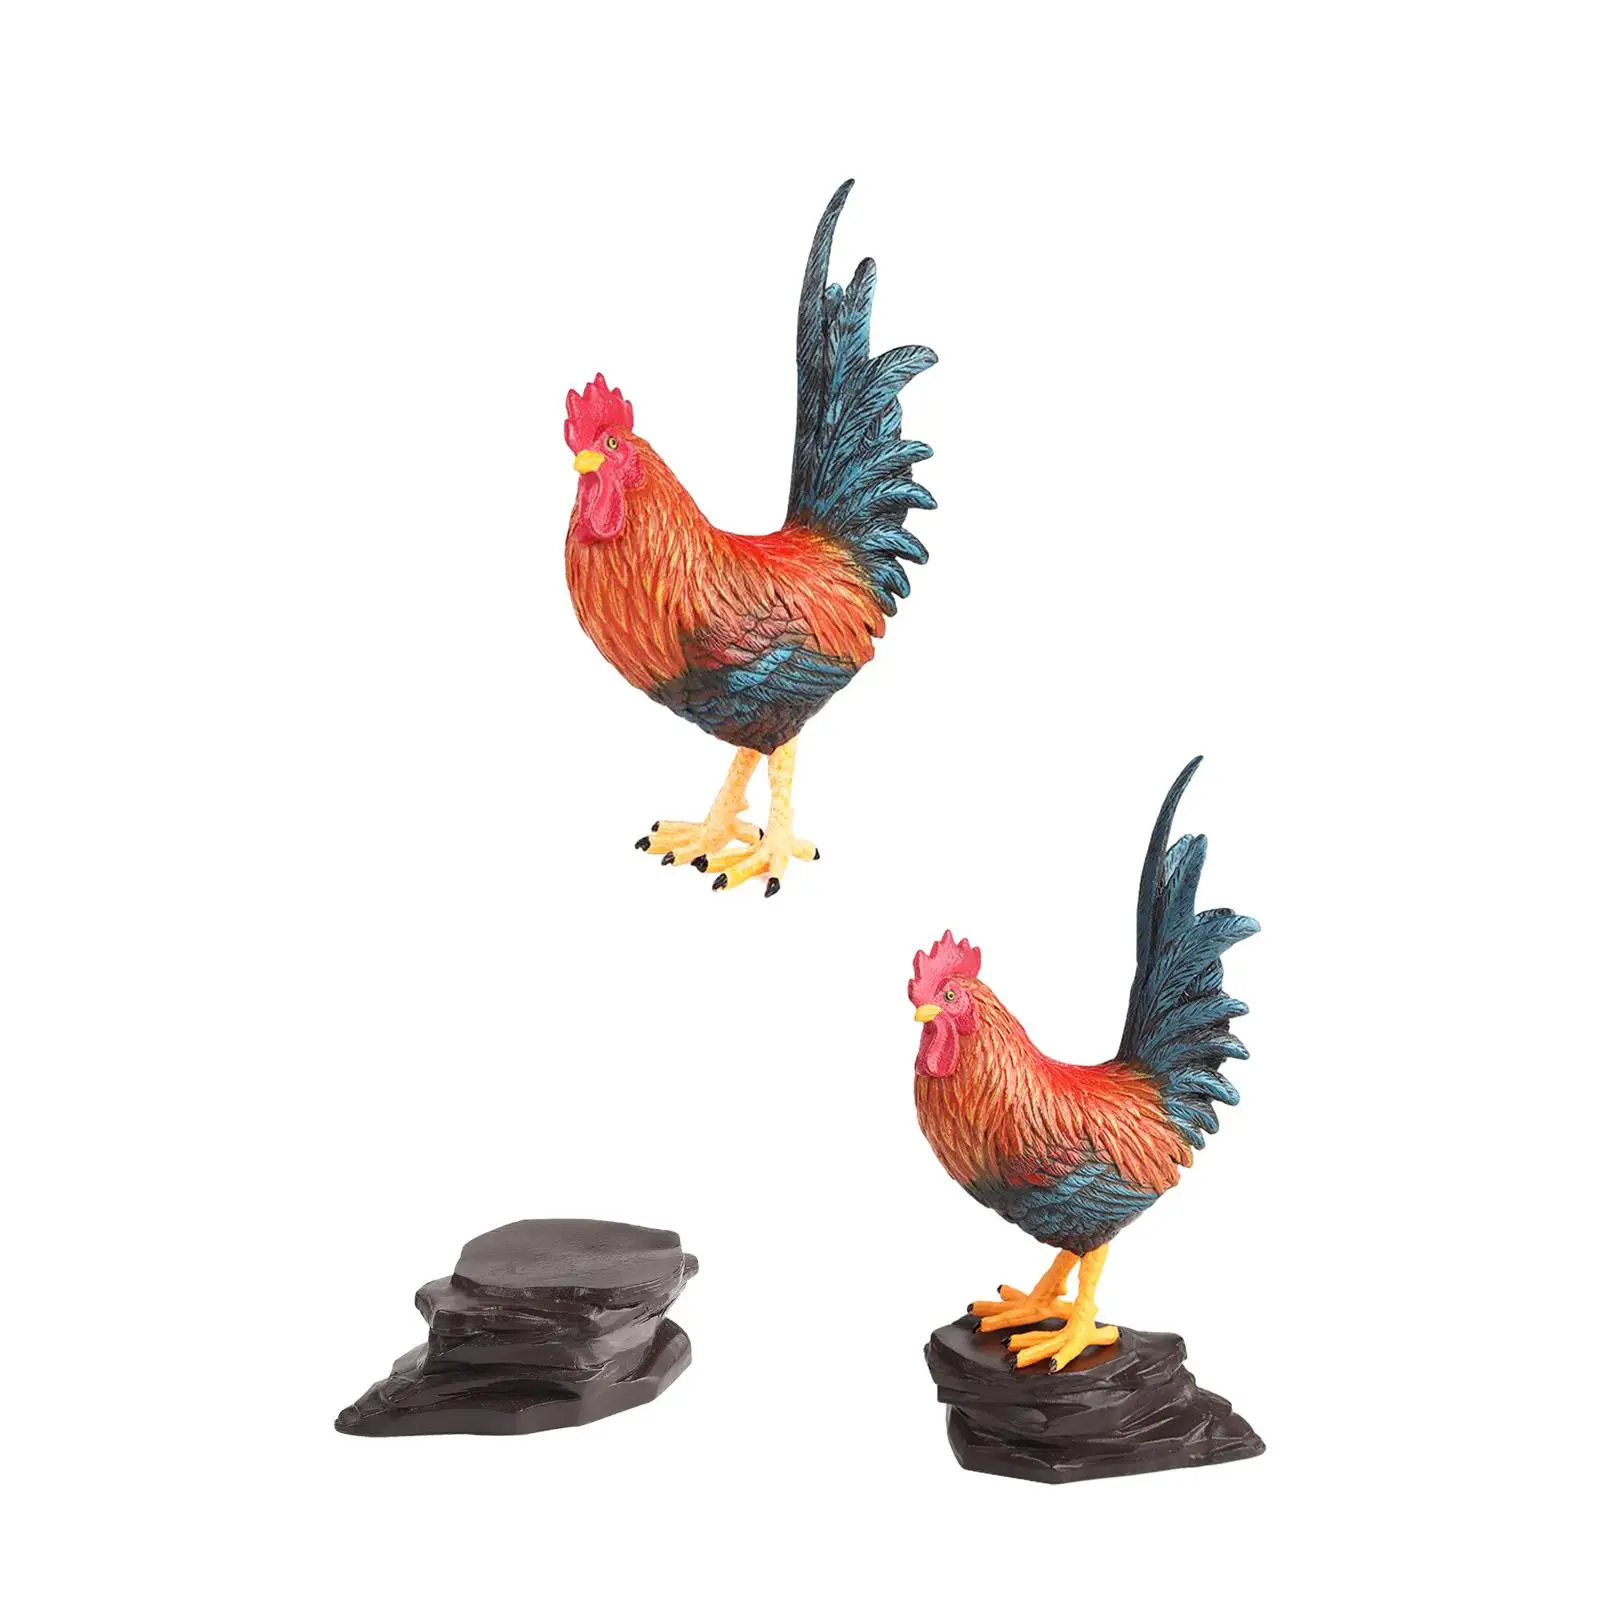 Realistic Rooster Toy Figurine Rooster Statues for Decoration Party Desktop